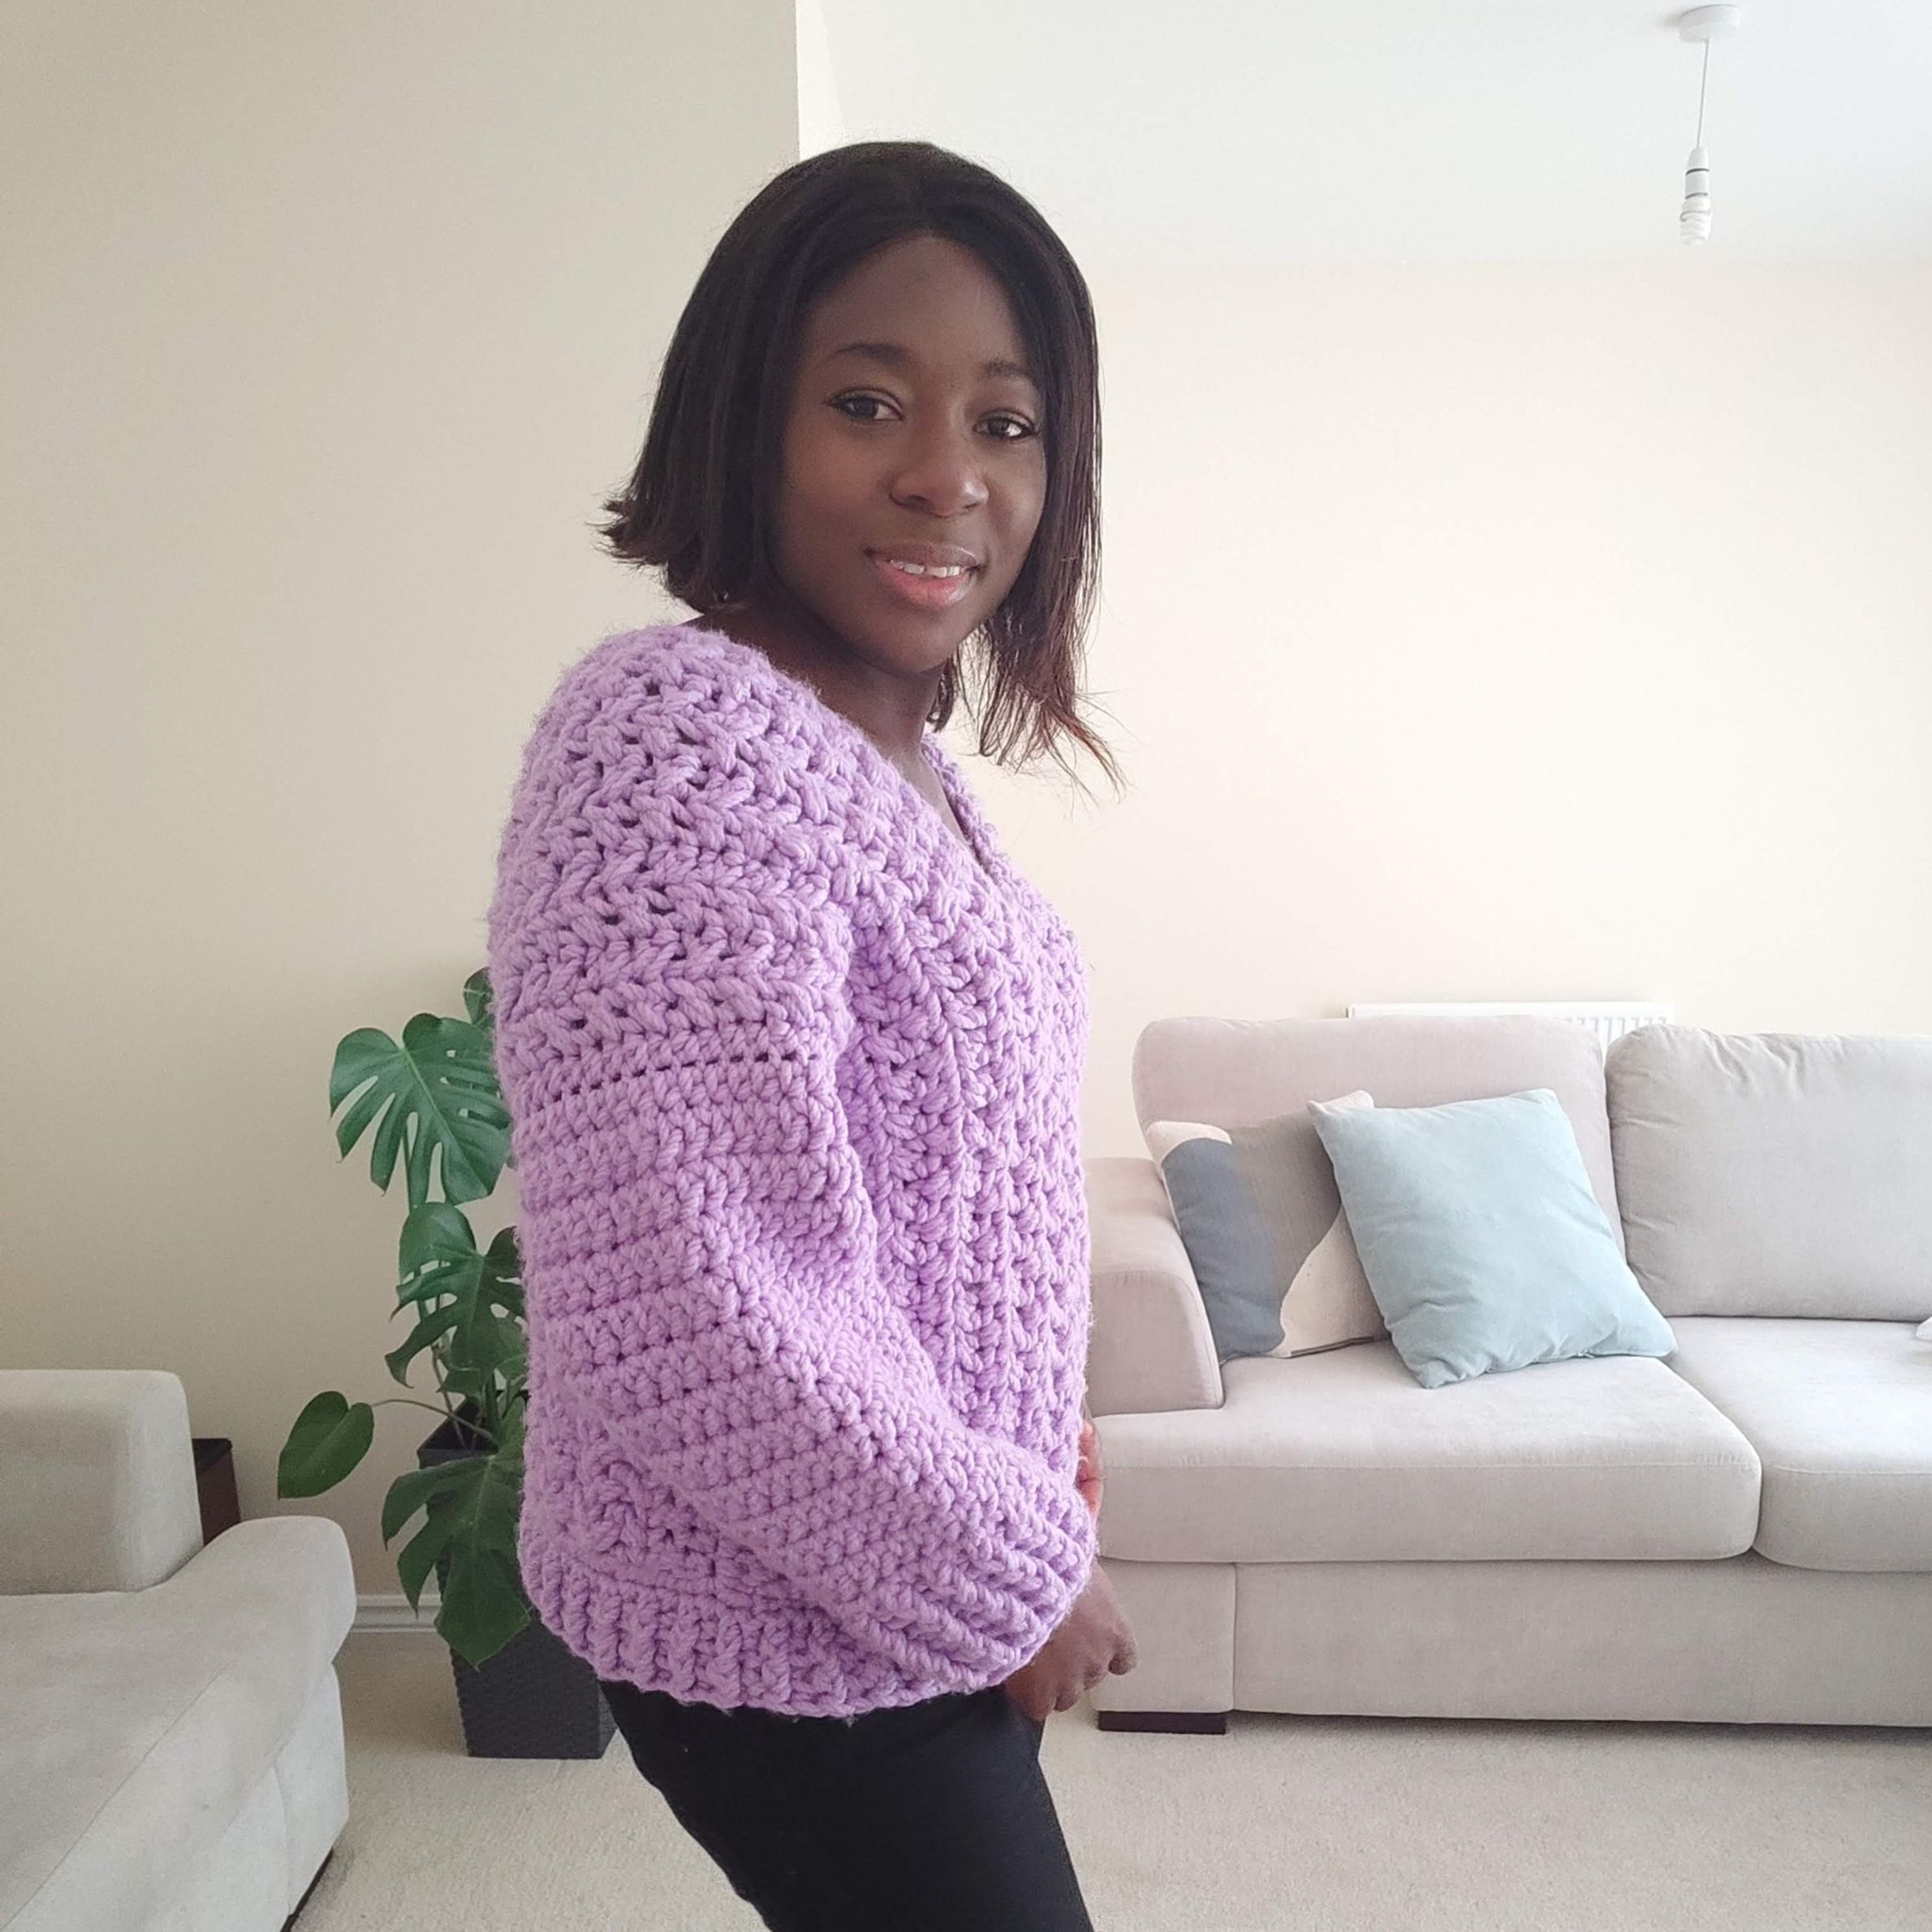 Fifty Below – Crochet Pattern for Textured Color-Block Sweater